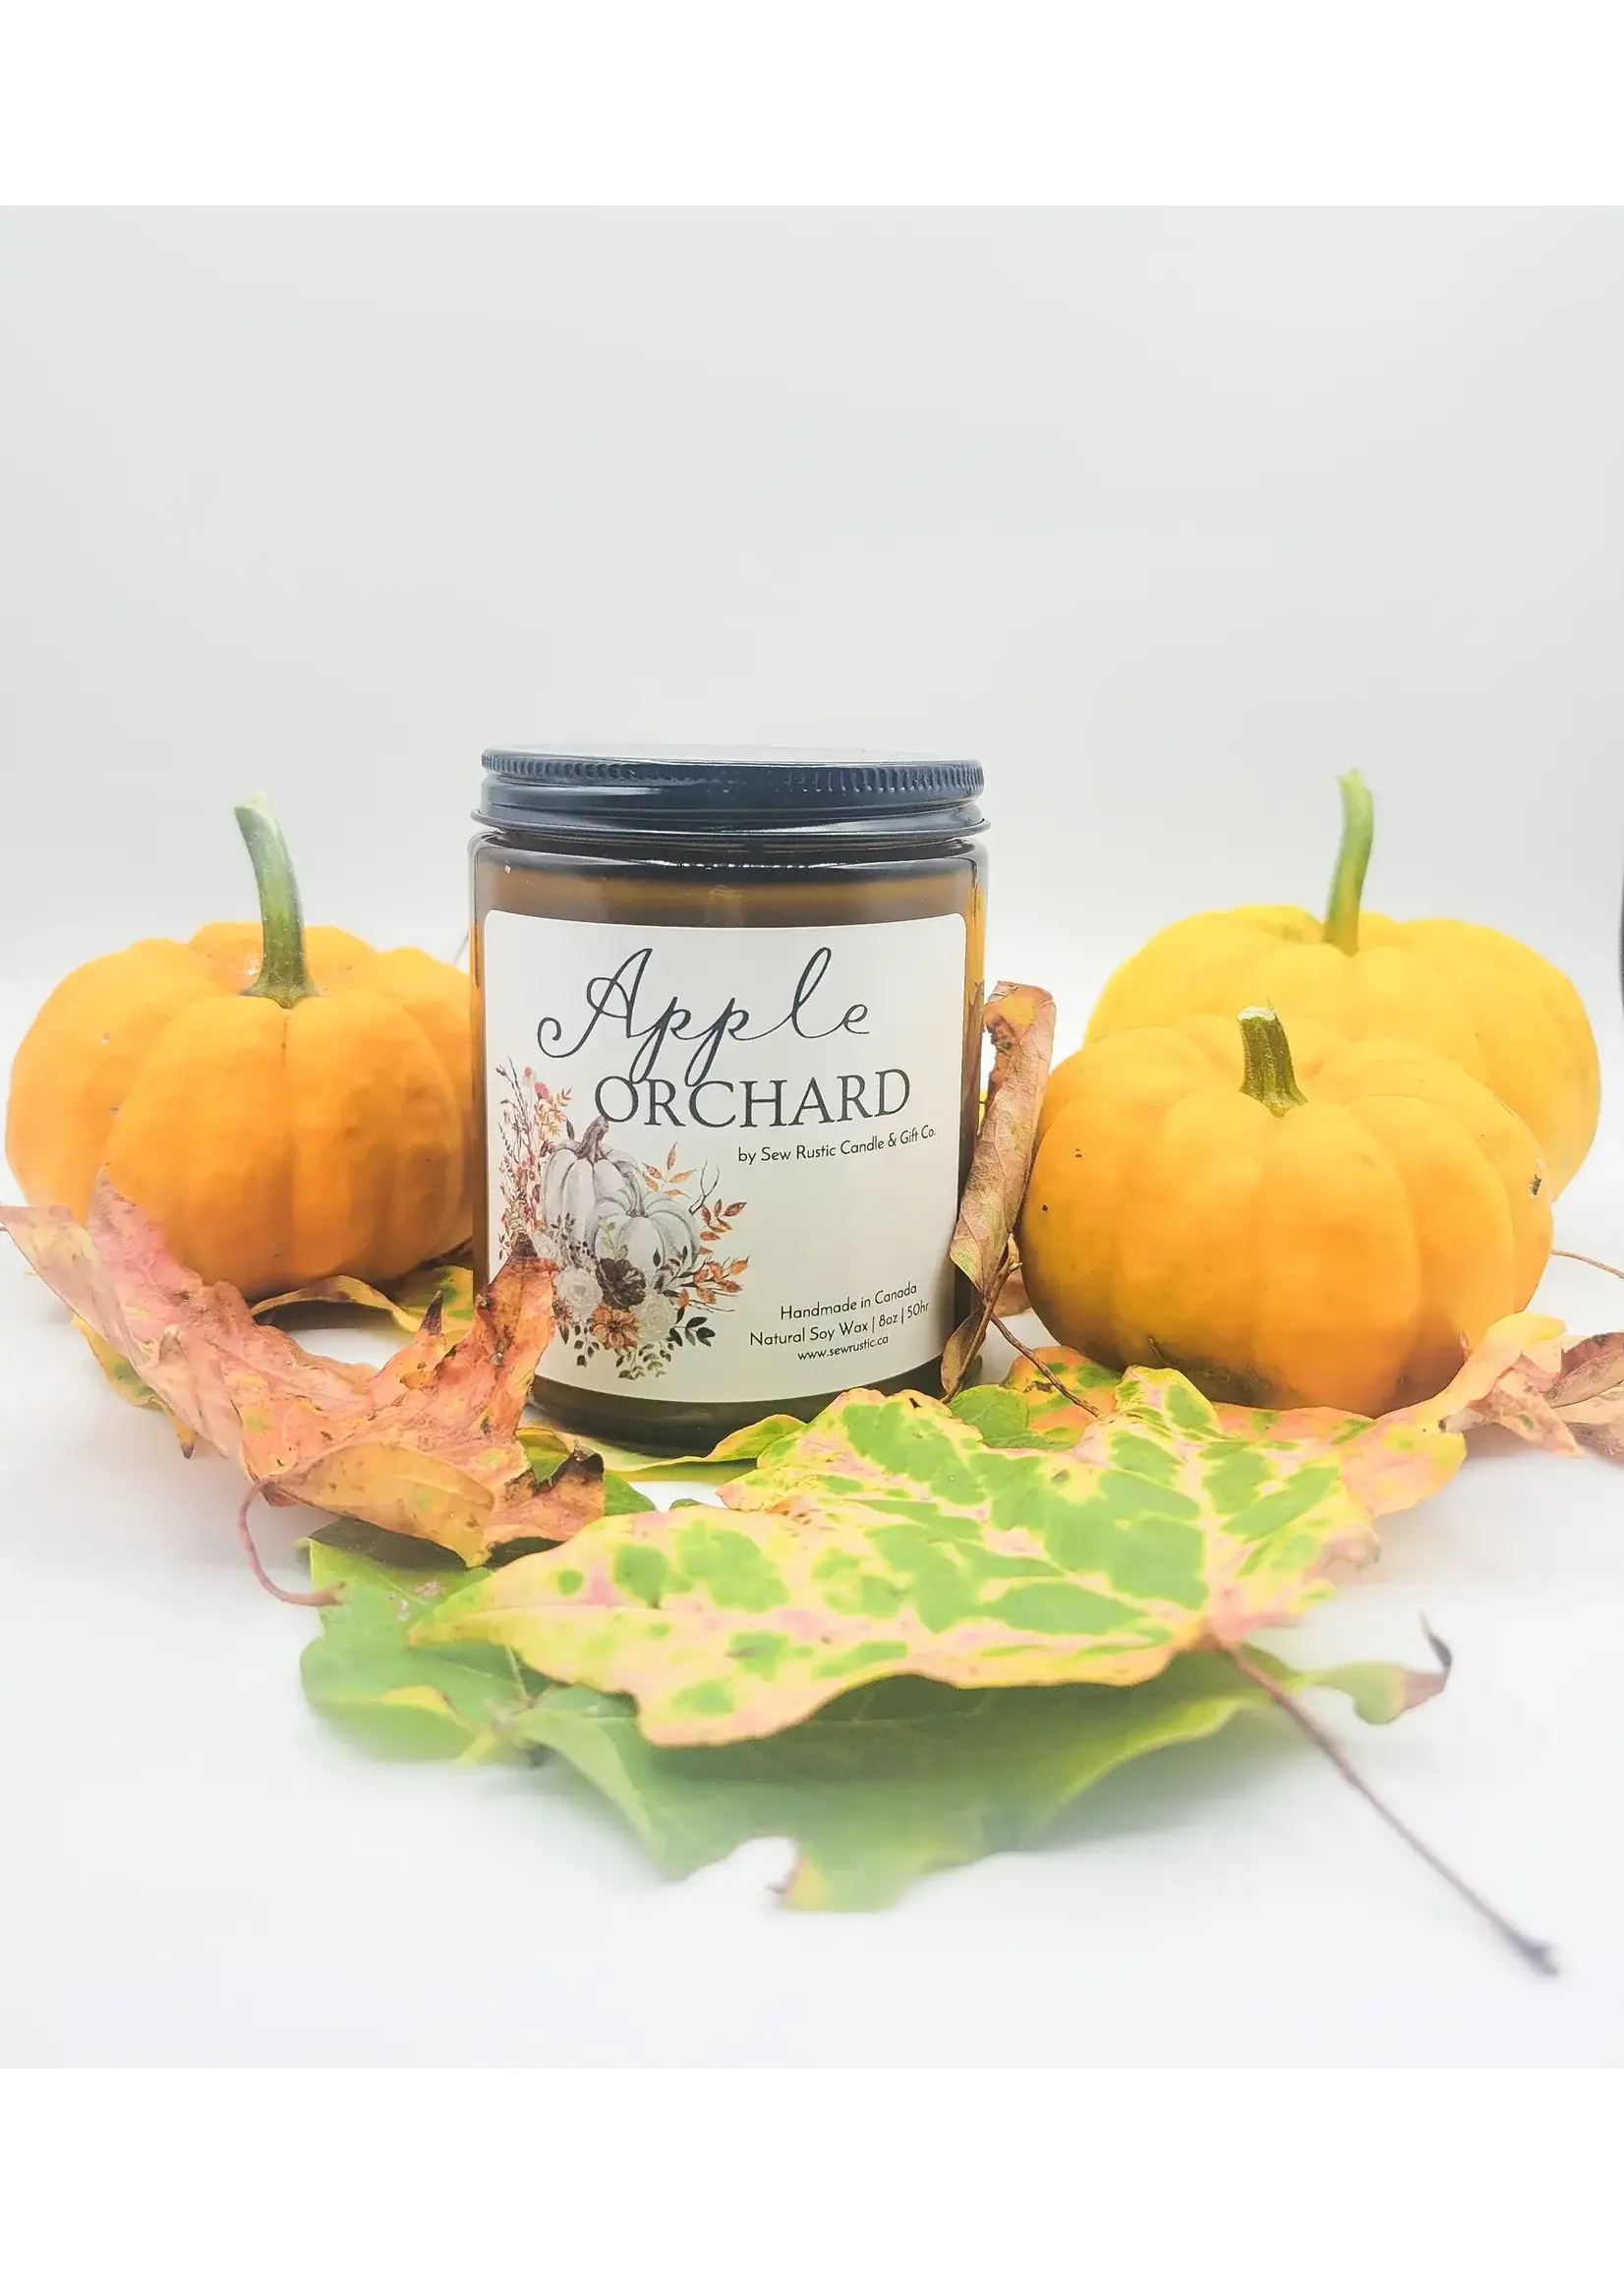 Sew Rustic APPLE ORCHARD 8 oz Soy Candle